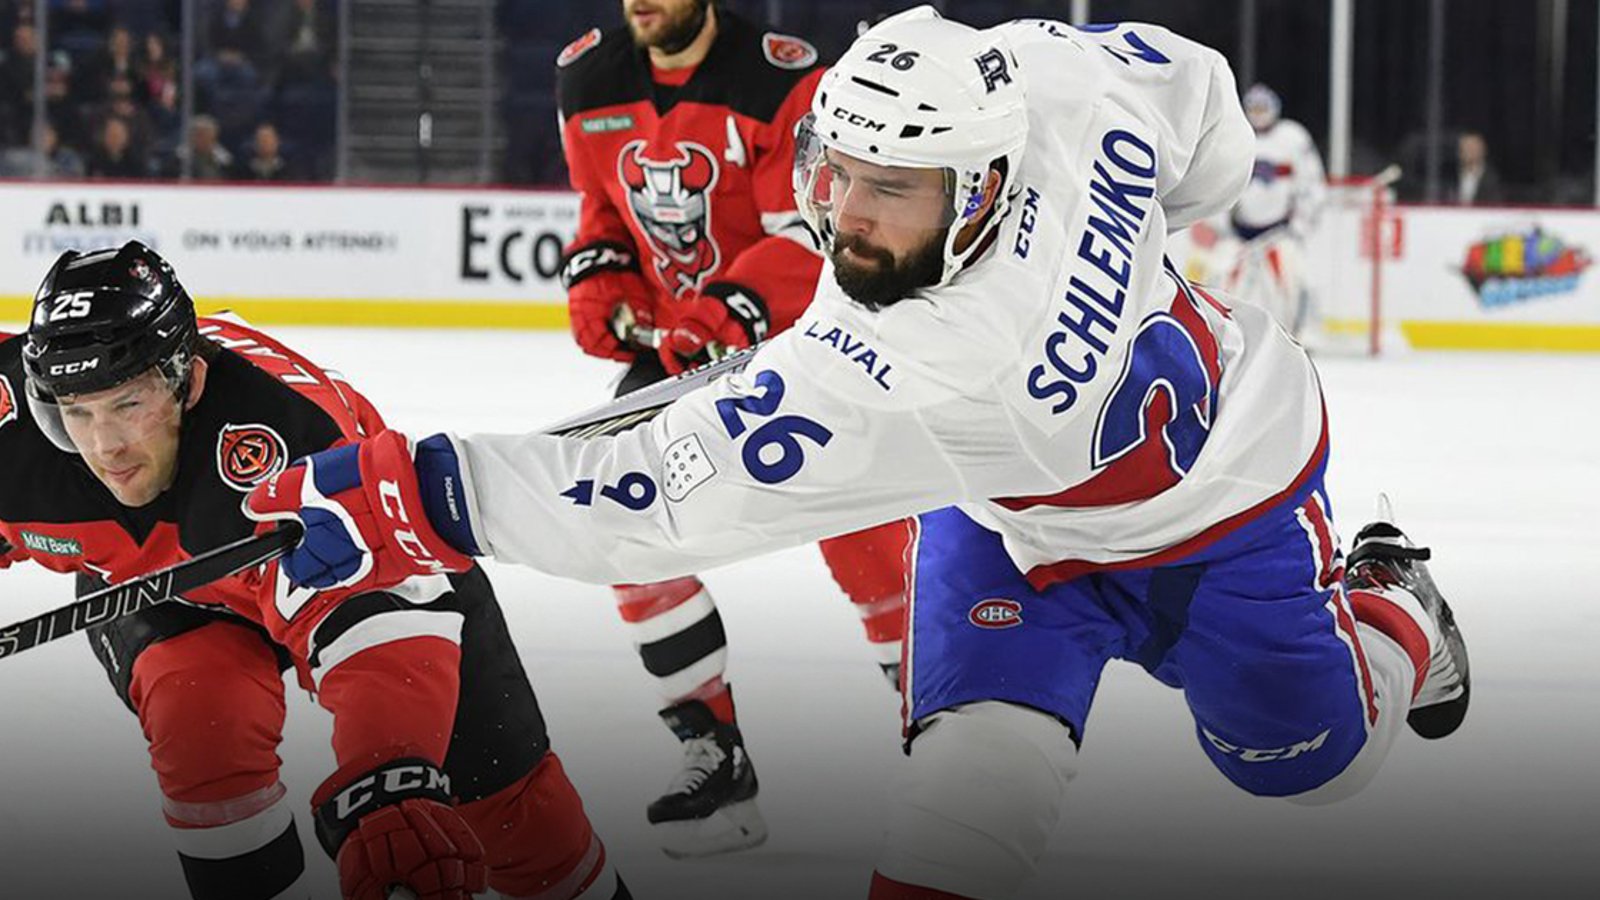 Breaking: Montreal announce a roster move